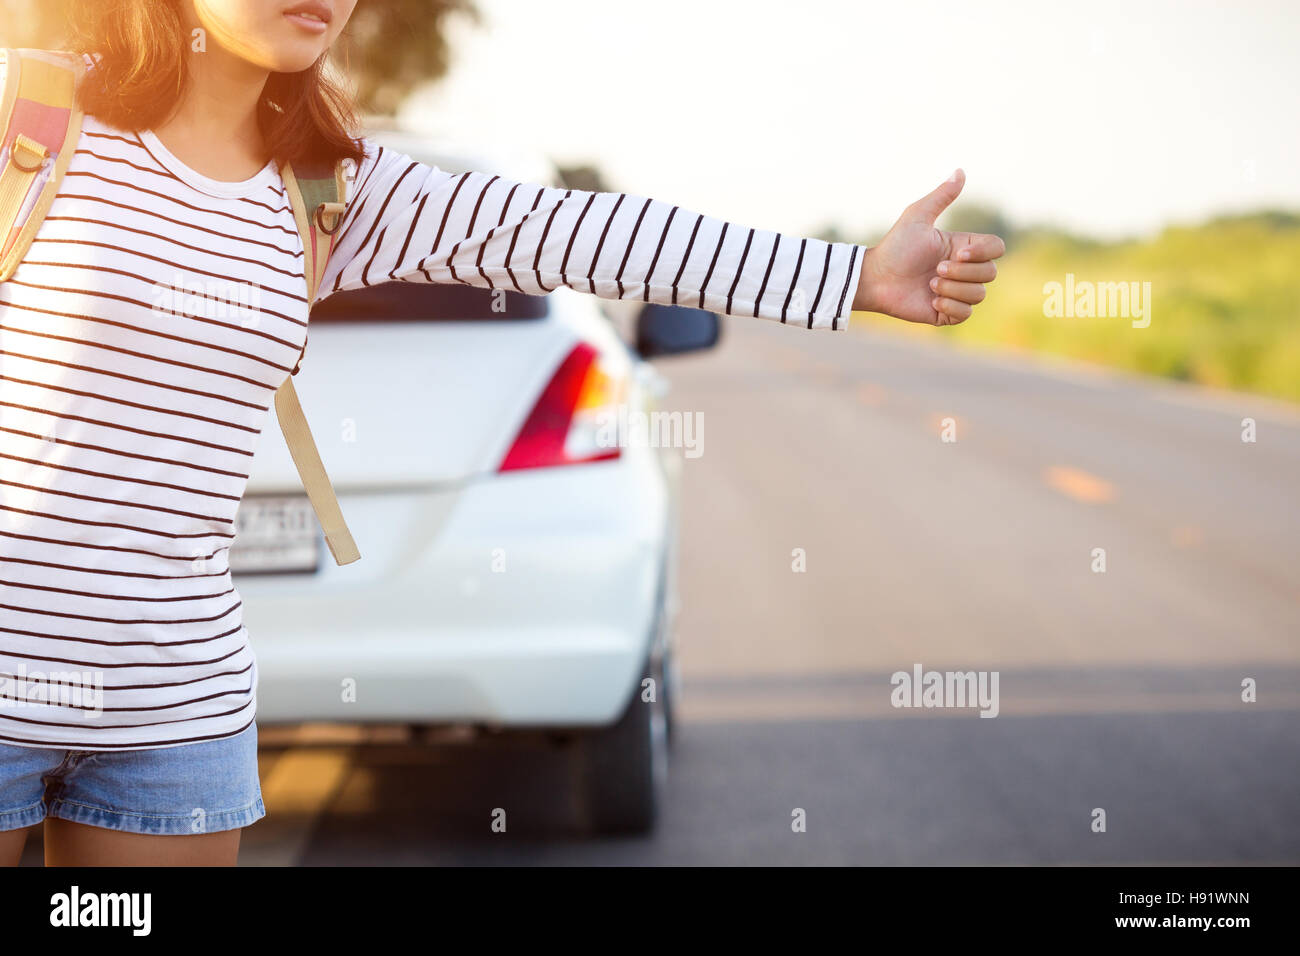 woman hitchhiking looking for help with her broken car on the road Stock Photo